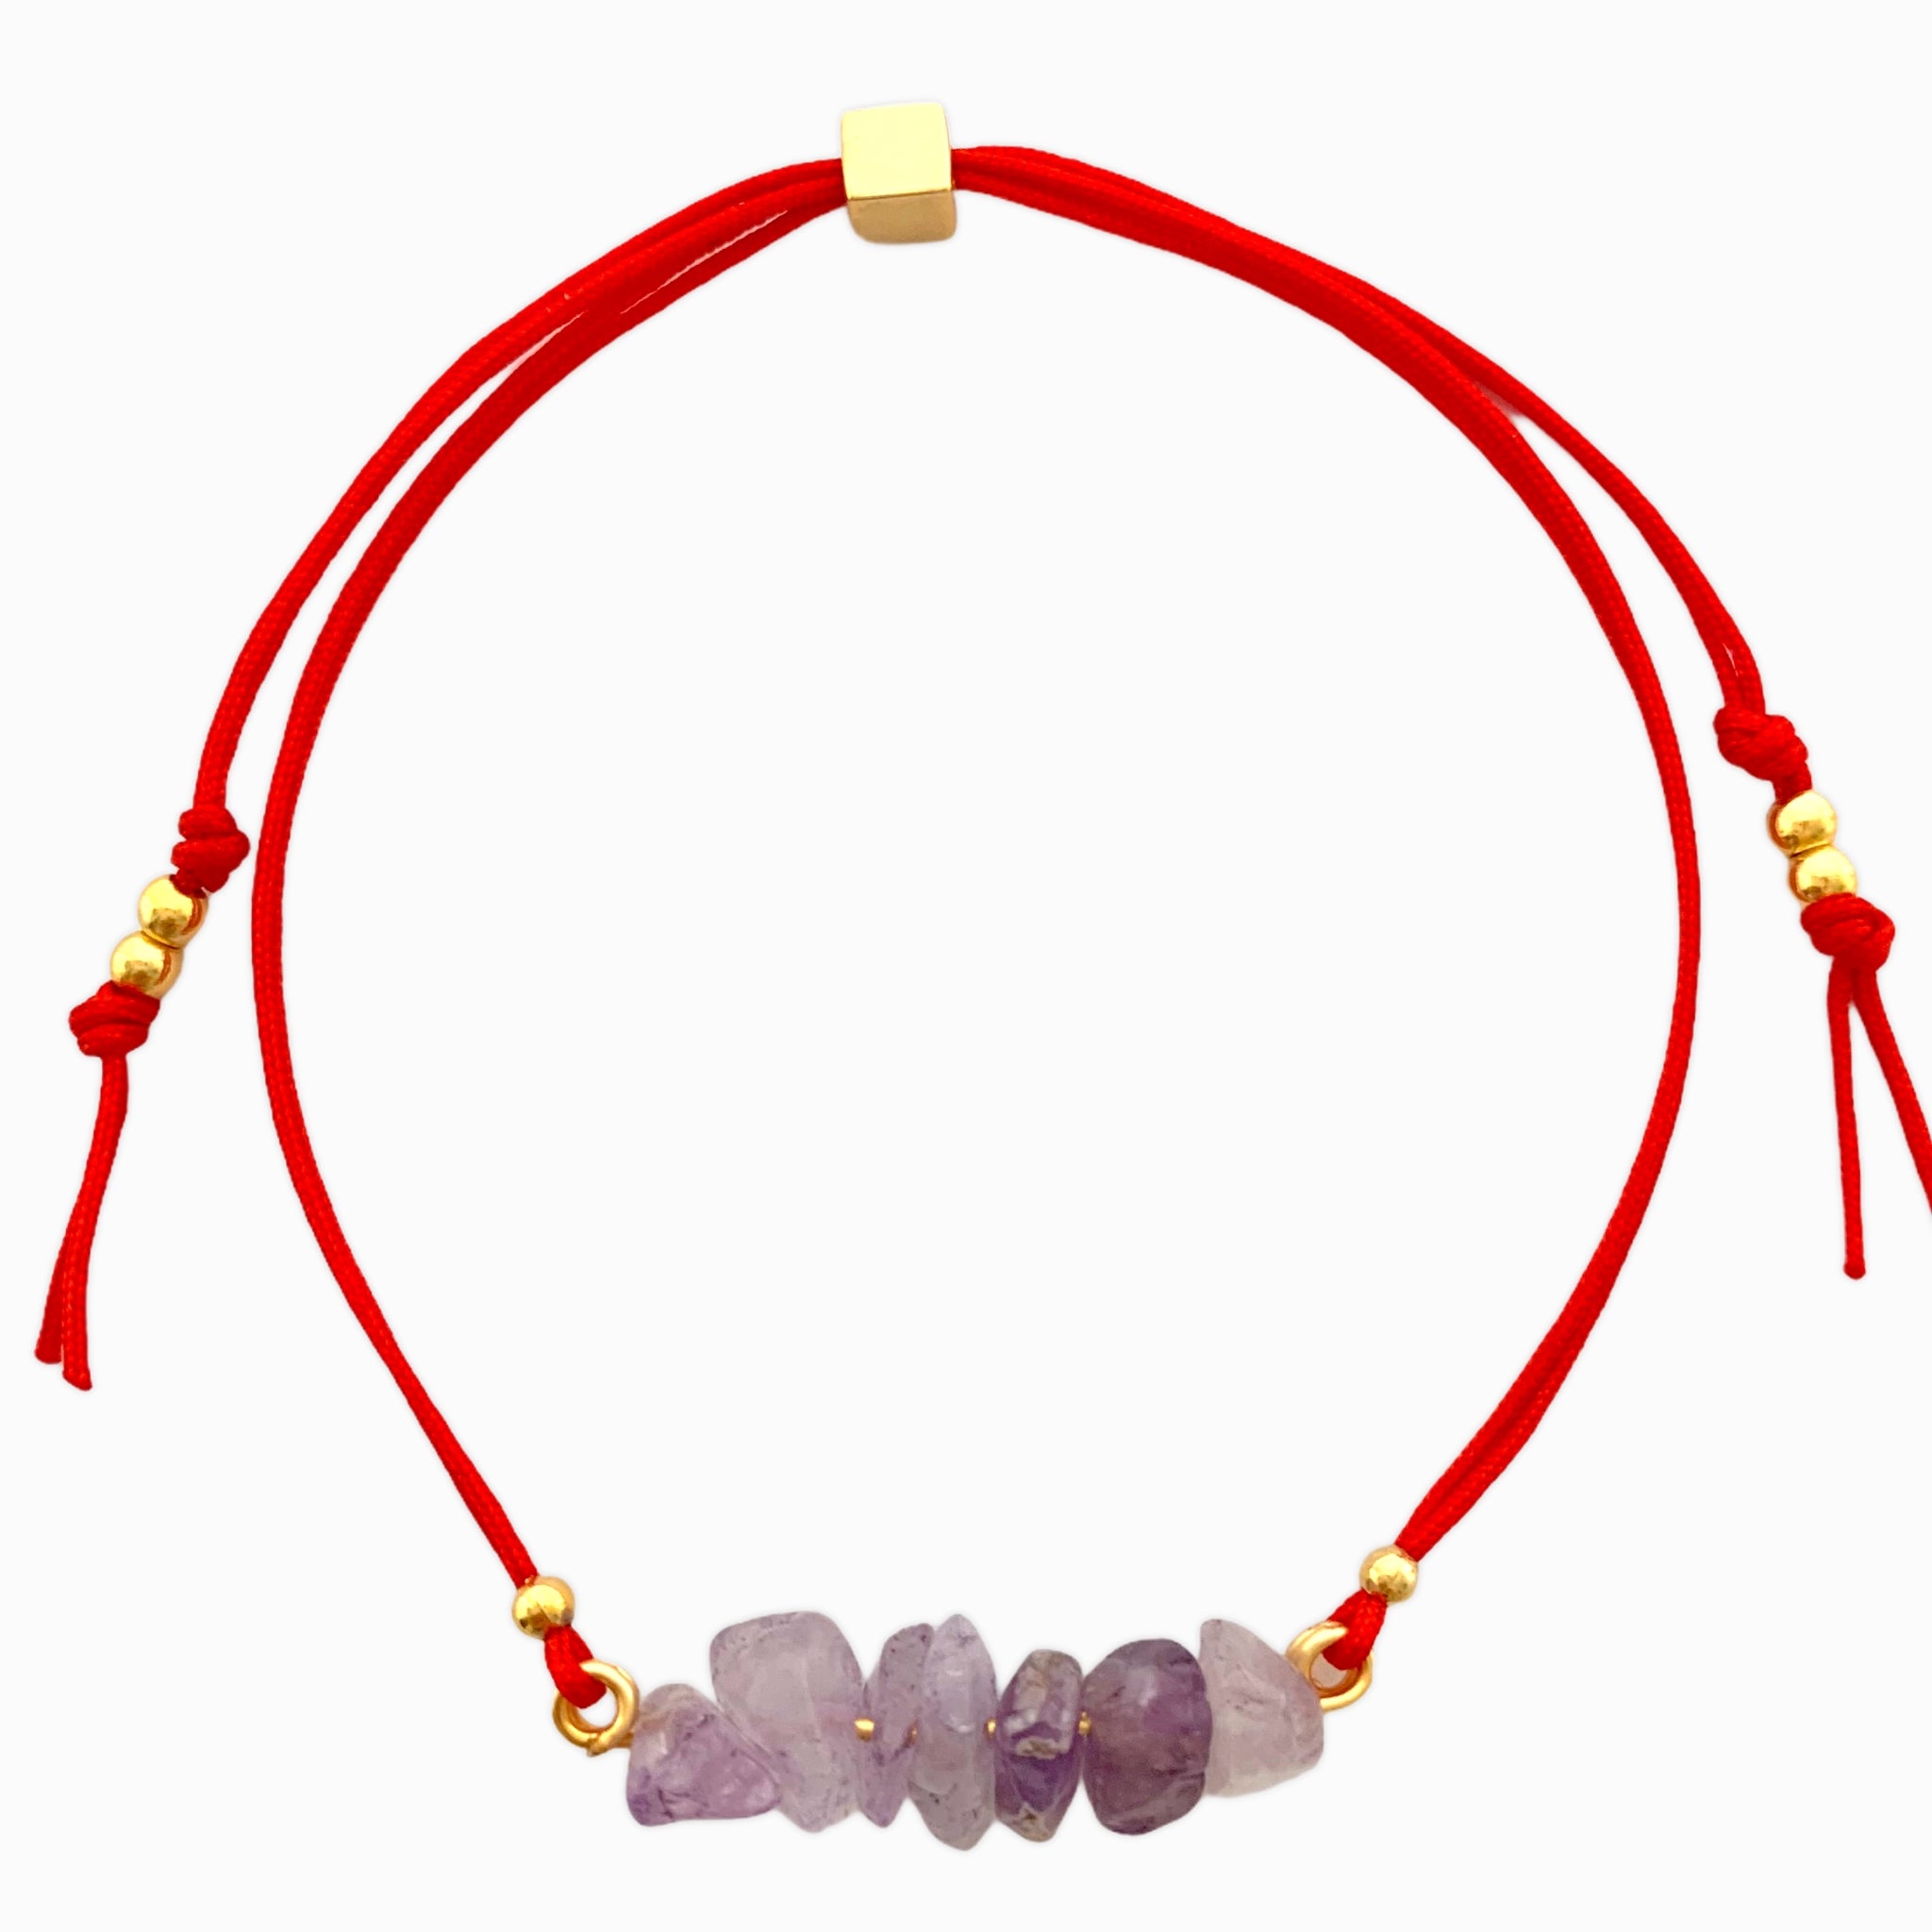 Amethyst Natural Stone Bracelet with Red Yarn